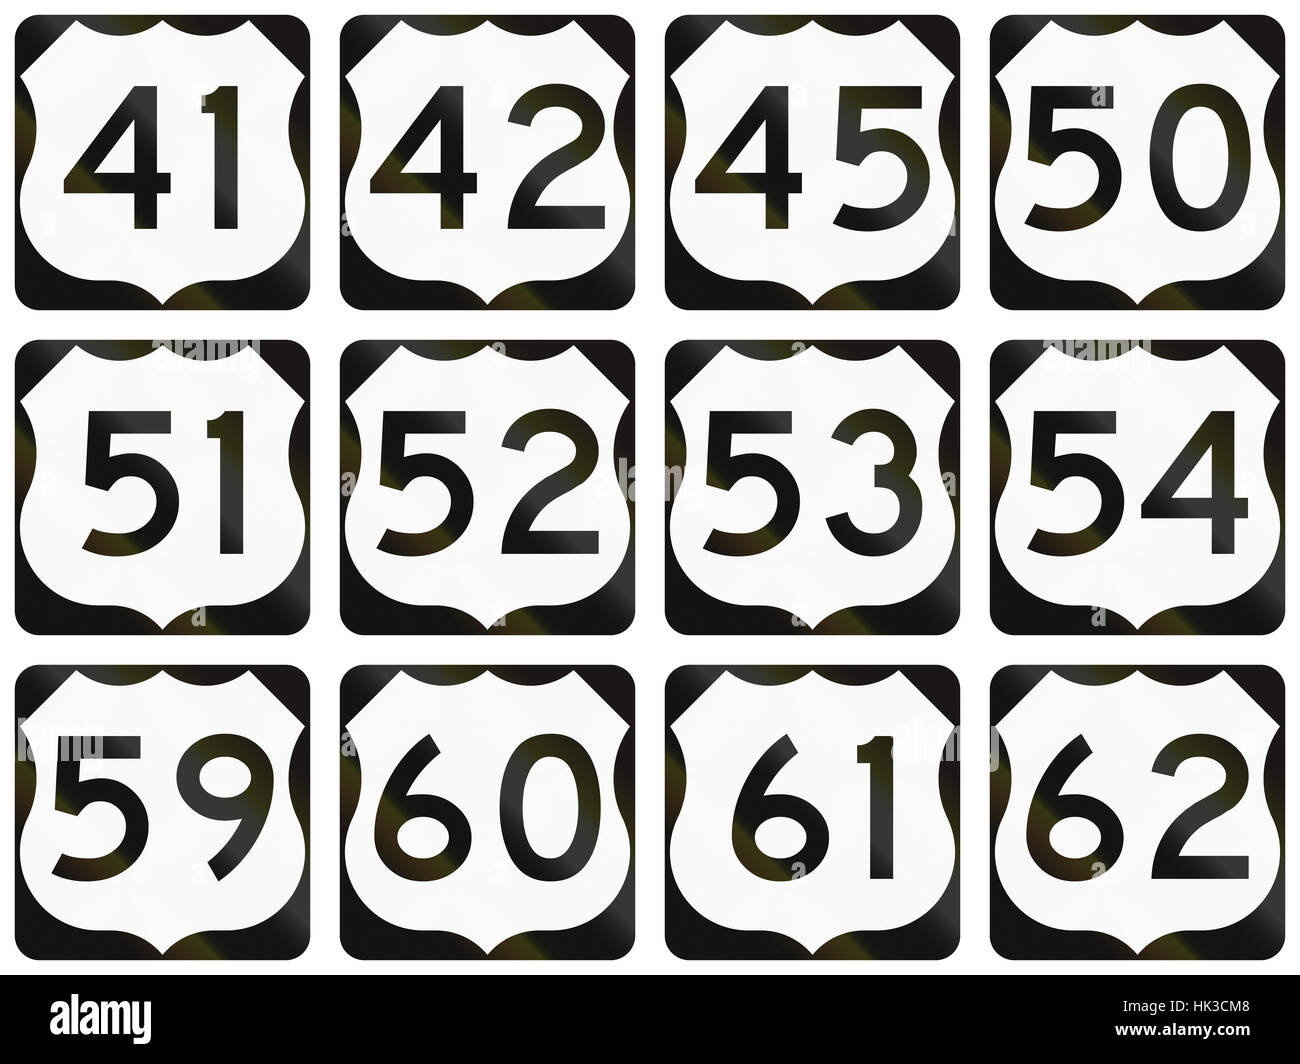 Collection of general United States Route shields. Stock Photo